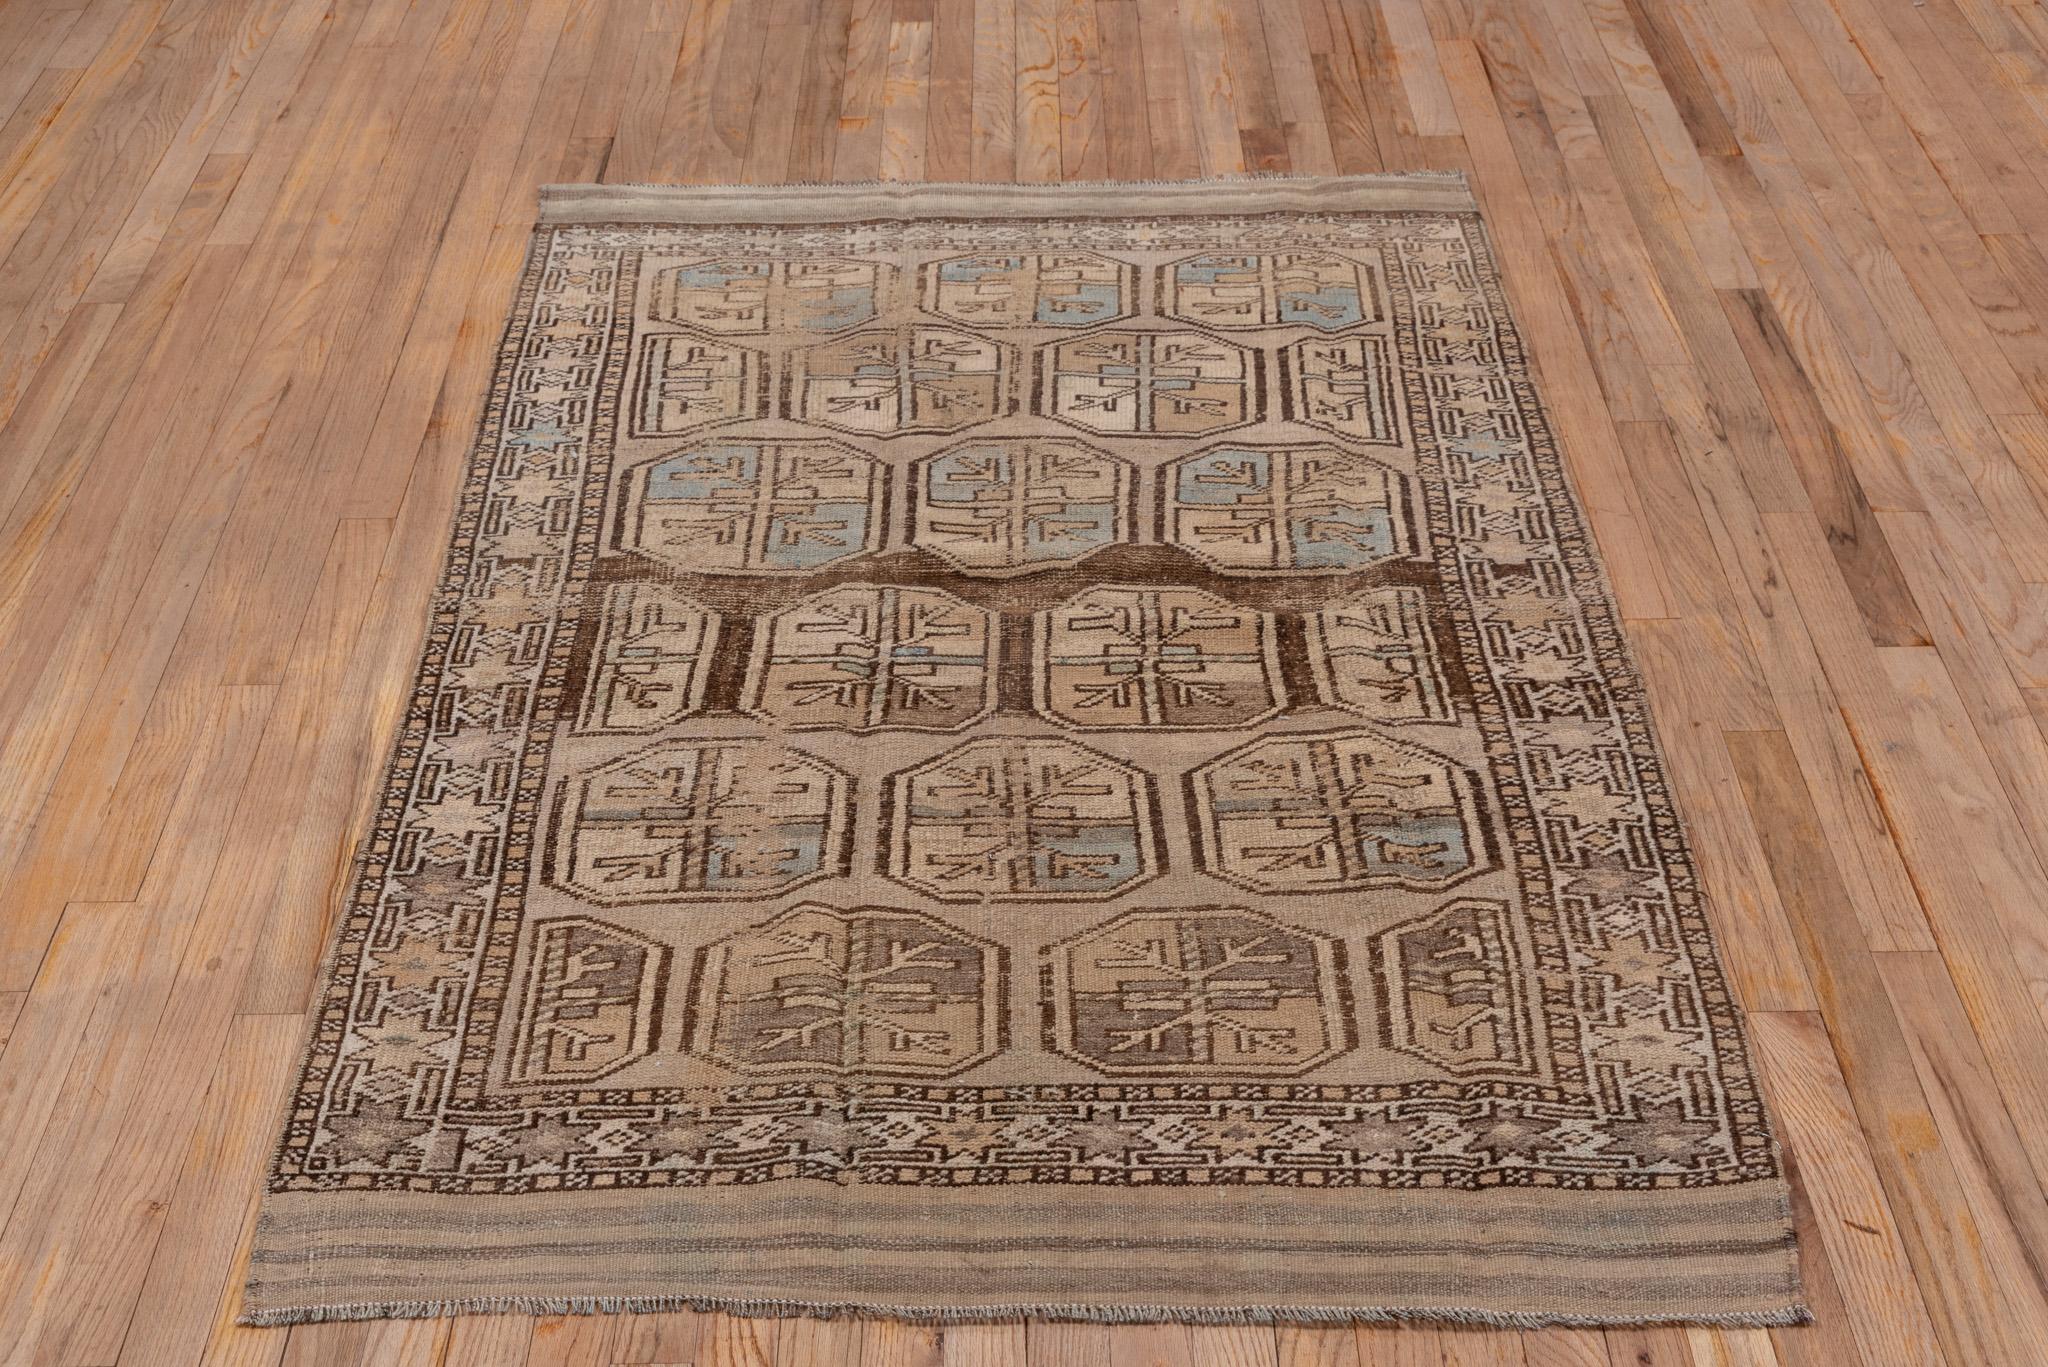 A Belouch Rug circa 1920. Handknotted with 100% wool yarn.